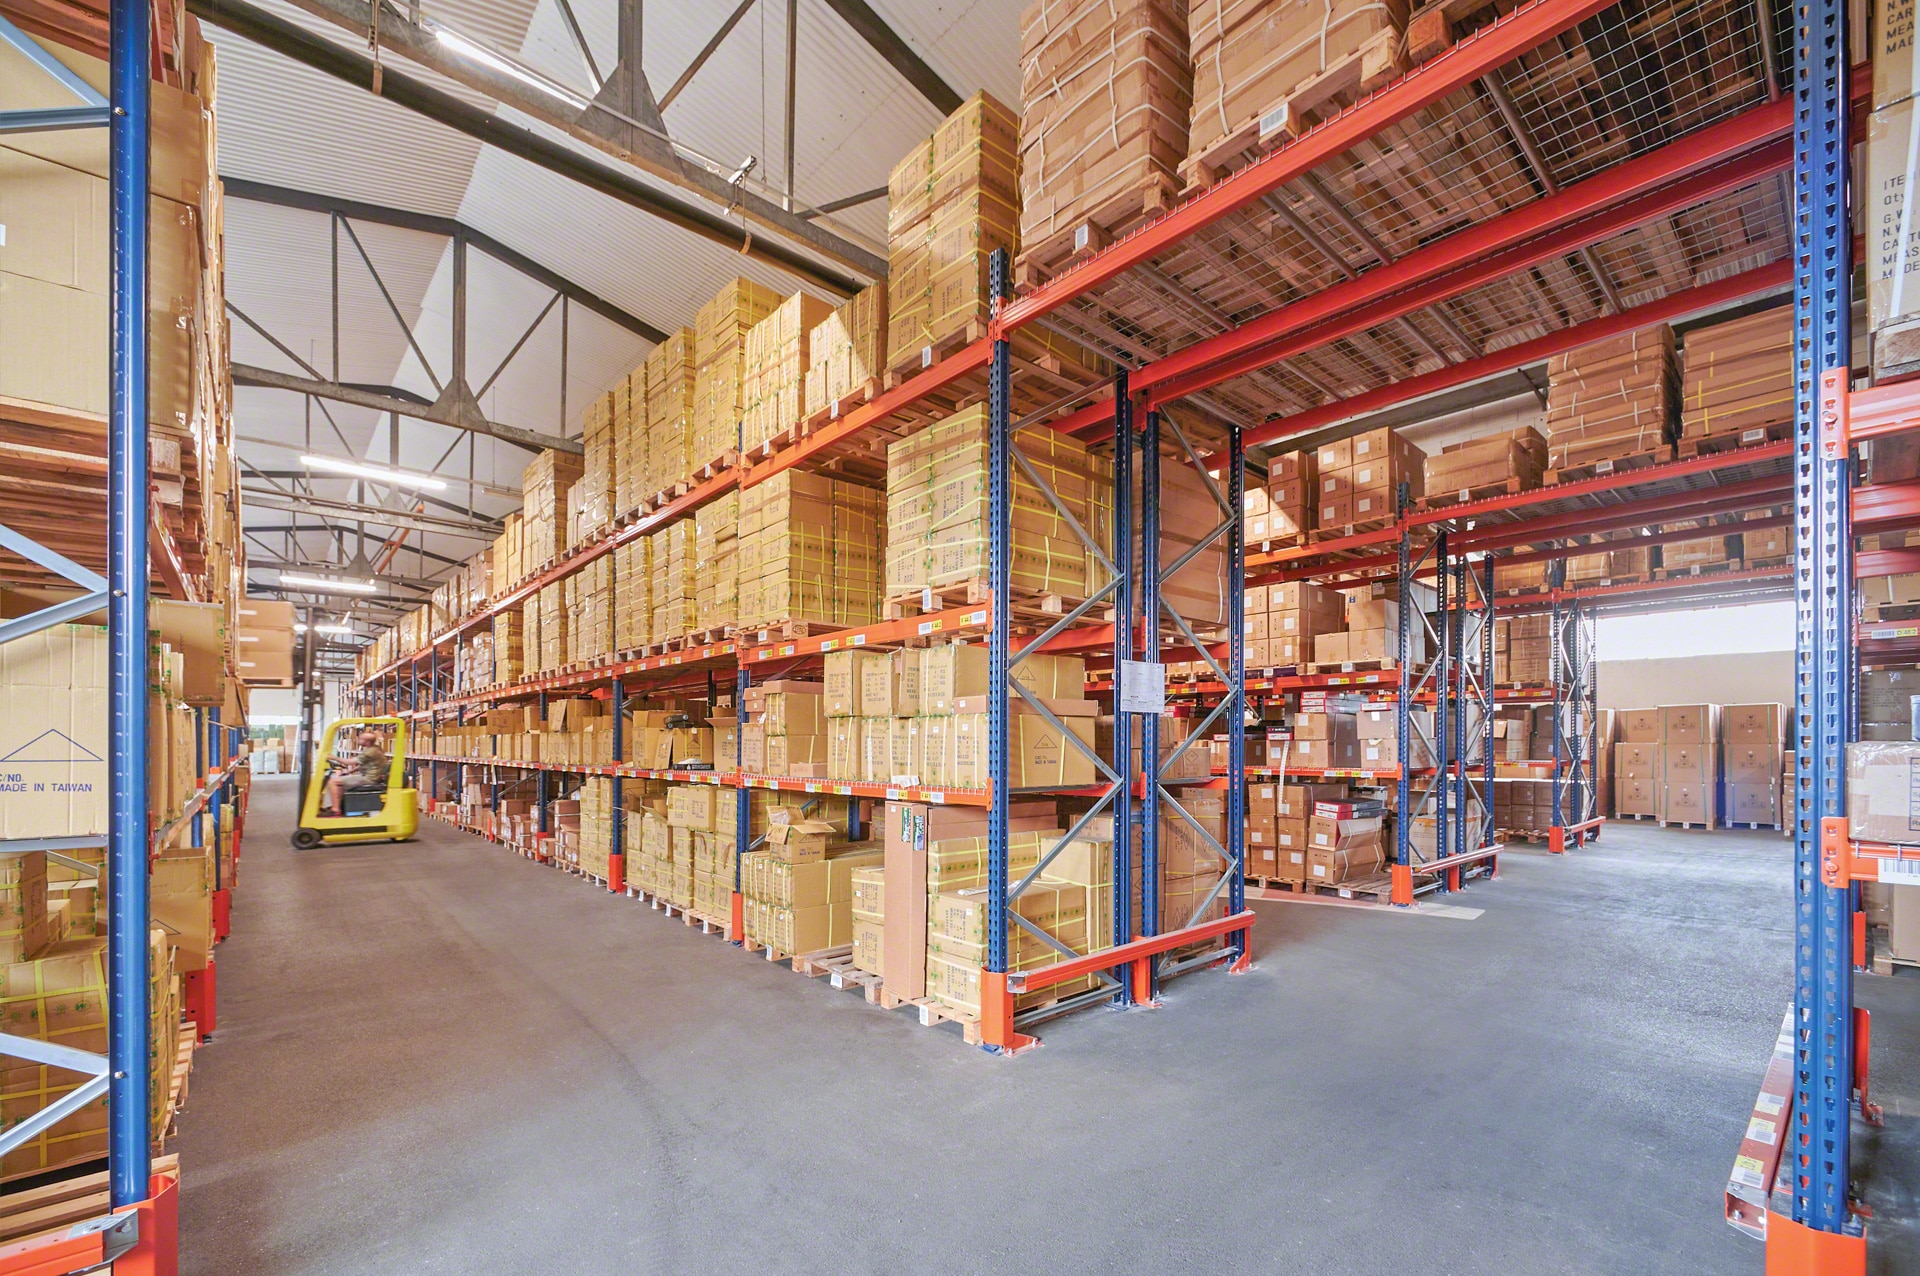 Warehouse of e-commerce airsoft product retailer Jolly Softair in San Marino